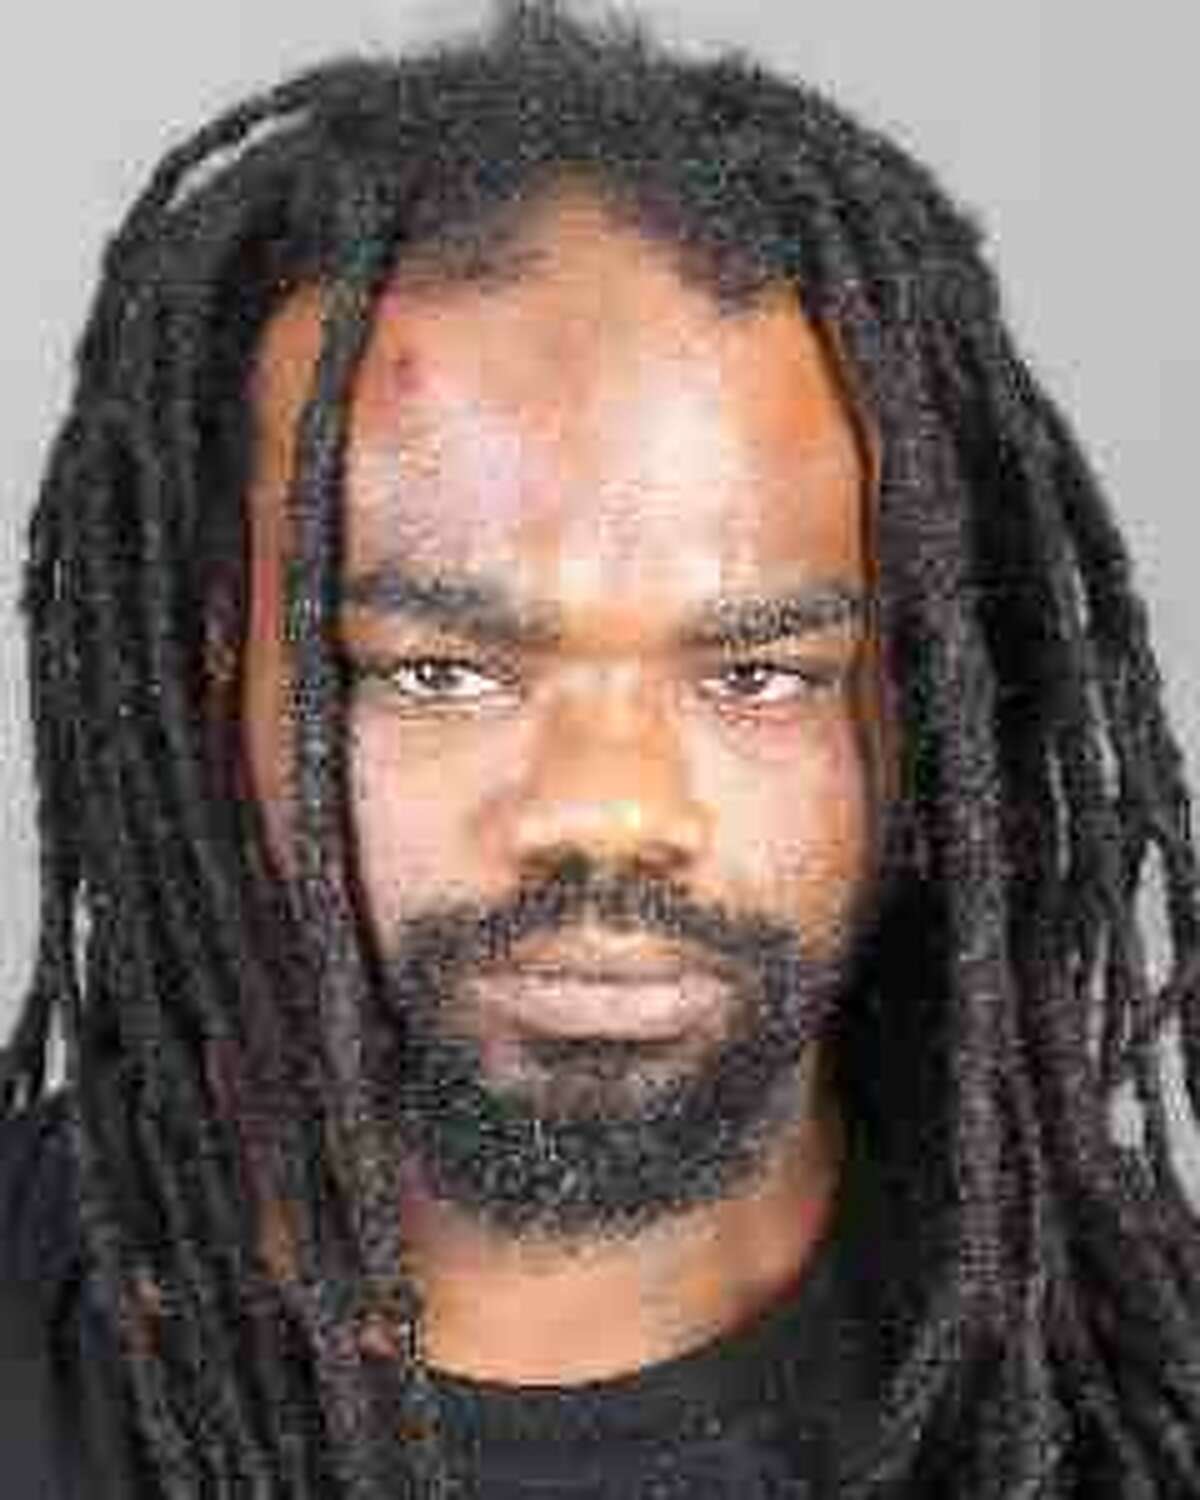 Victor Williams, of Albany, was charged with drug-related offenses after a sweep on July 10.